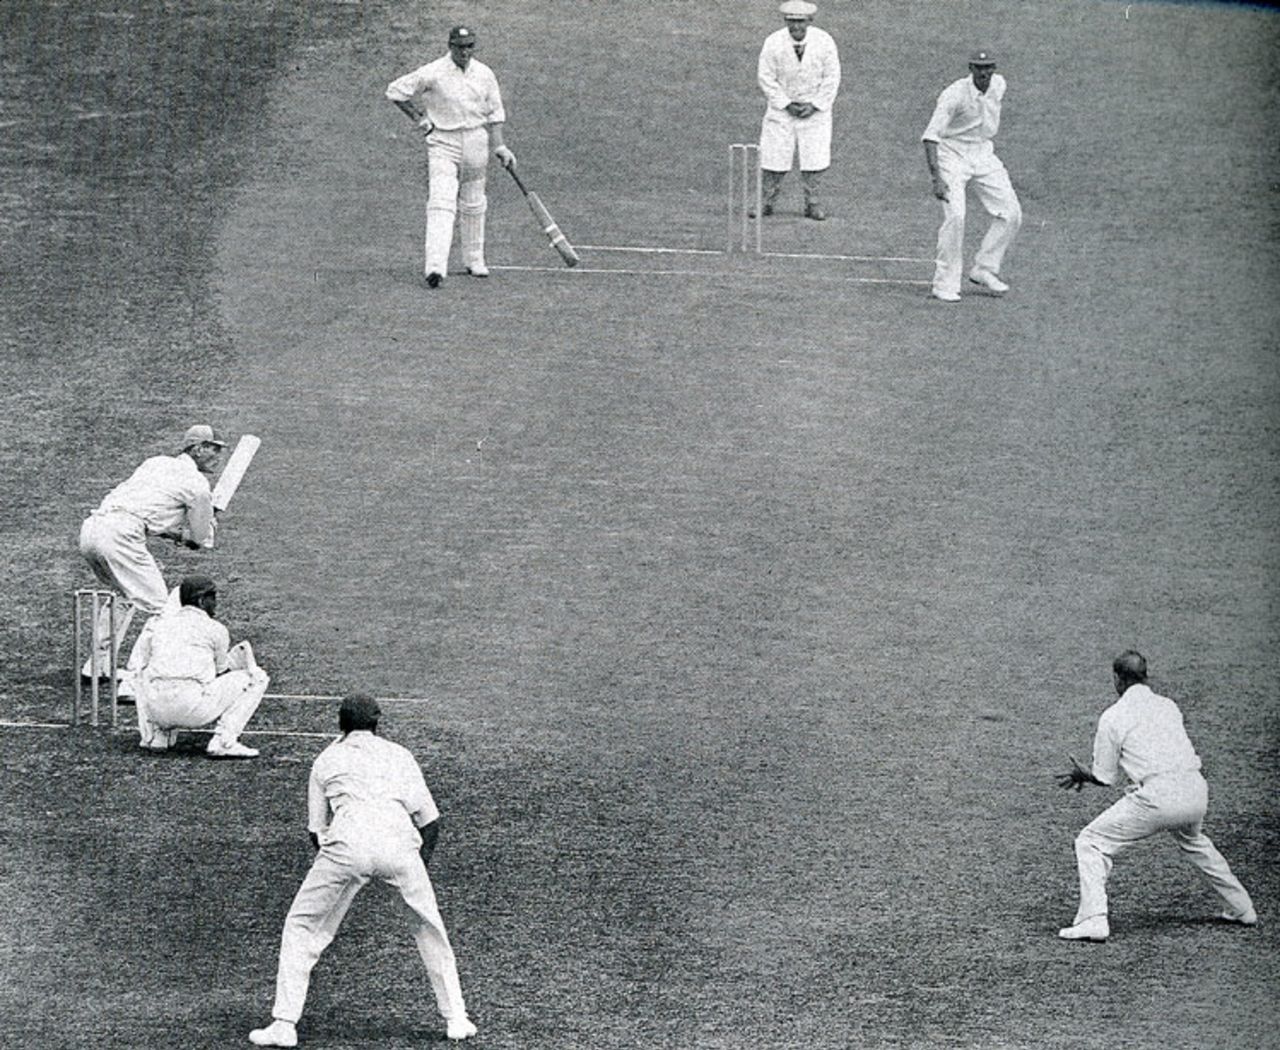 Douglas Jardine cuts CK Nayudu on his way to a top score of 79, England v India, Lord's, June 25, 1932